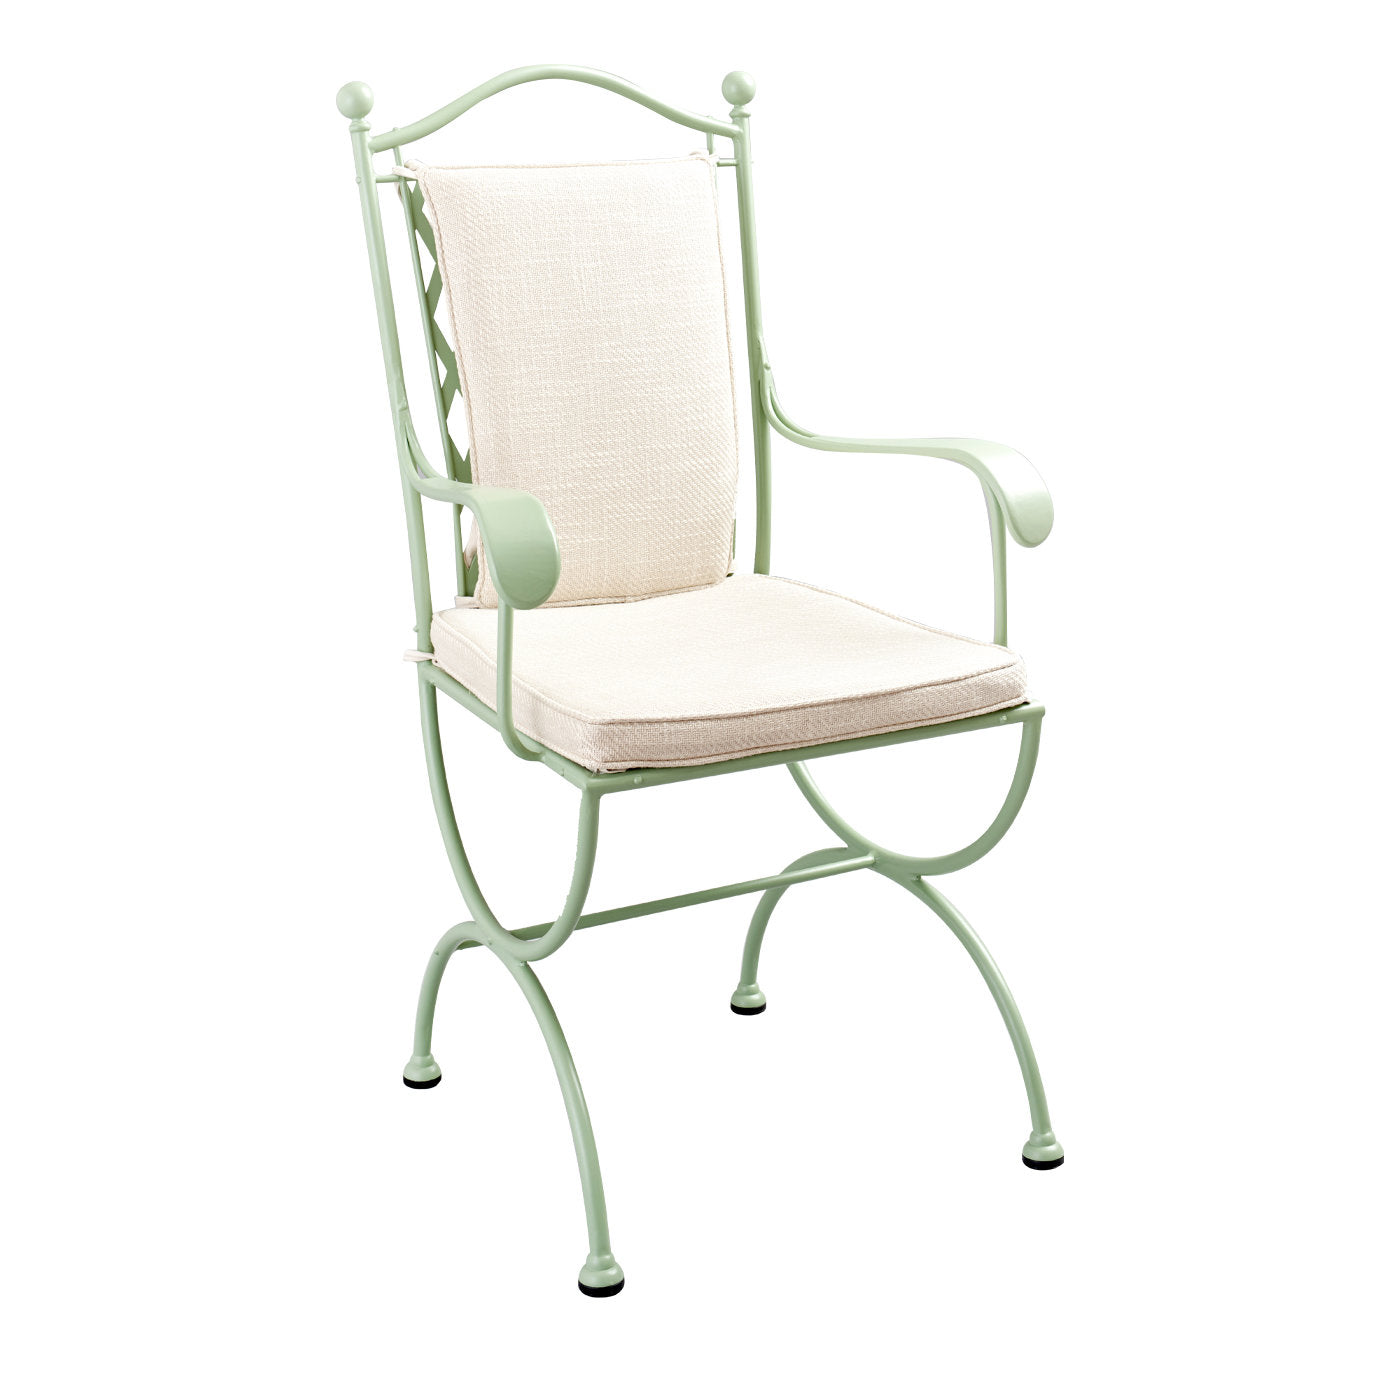 Rombi Outdoor Green Stainless Steel Chair with Armrests in Stainless Steel - Main view